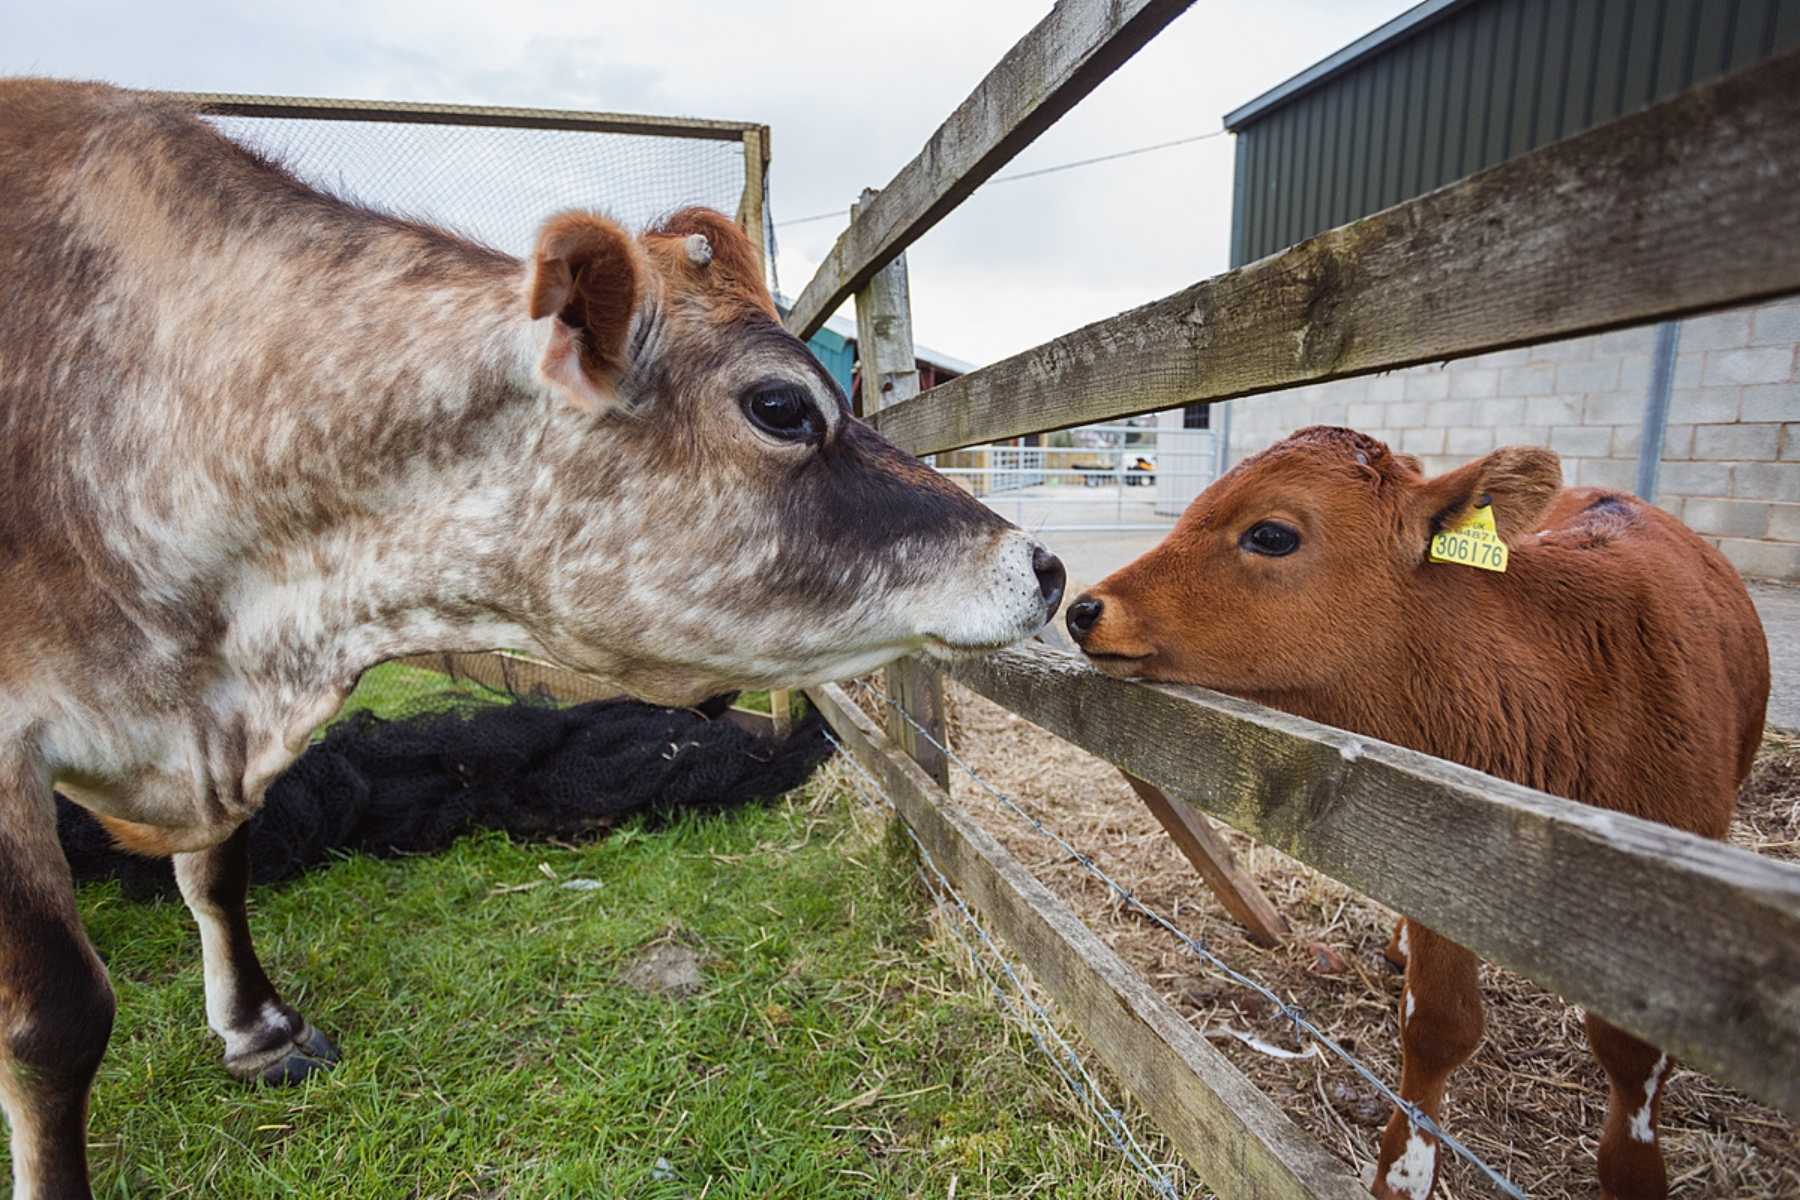 A cow curiously greets a calf at the animal sanctuary.